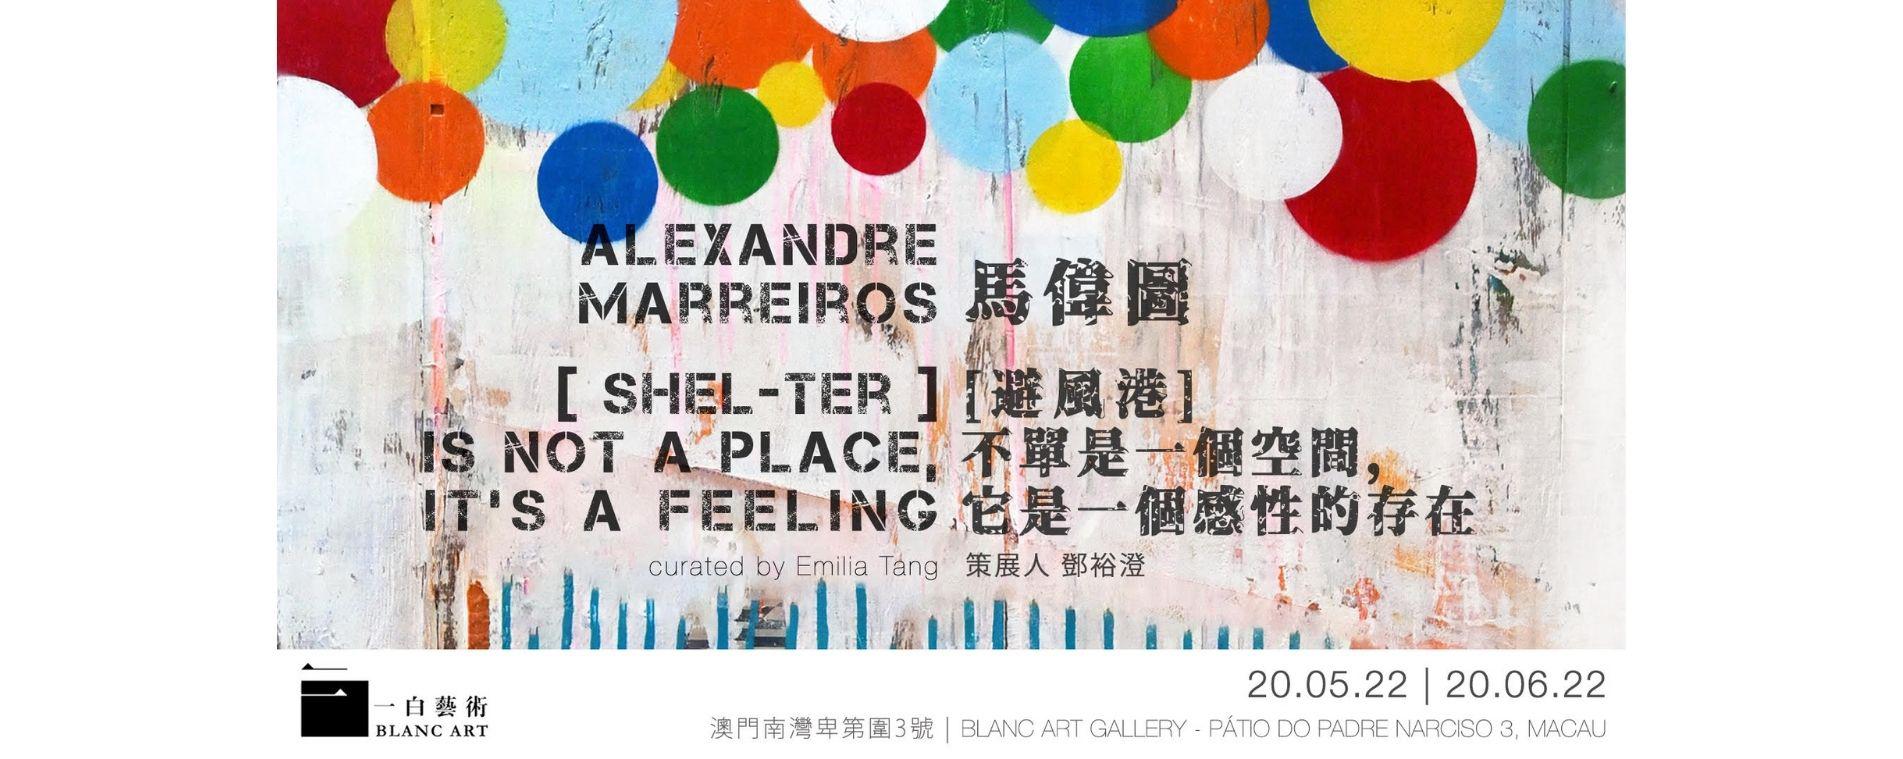 FMCC Arts and Culture Event - BLANC ART [Shel-ter] Exhibition Peekaboo Preview Evening